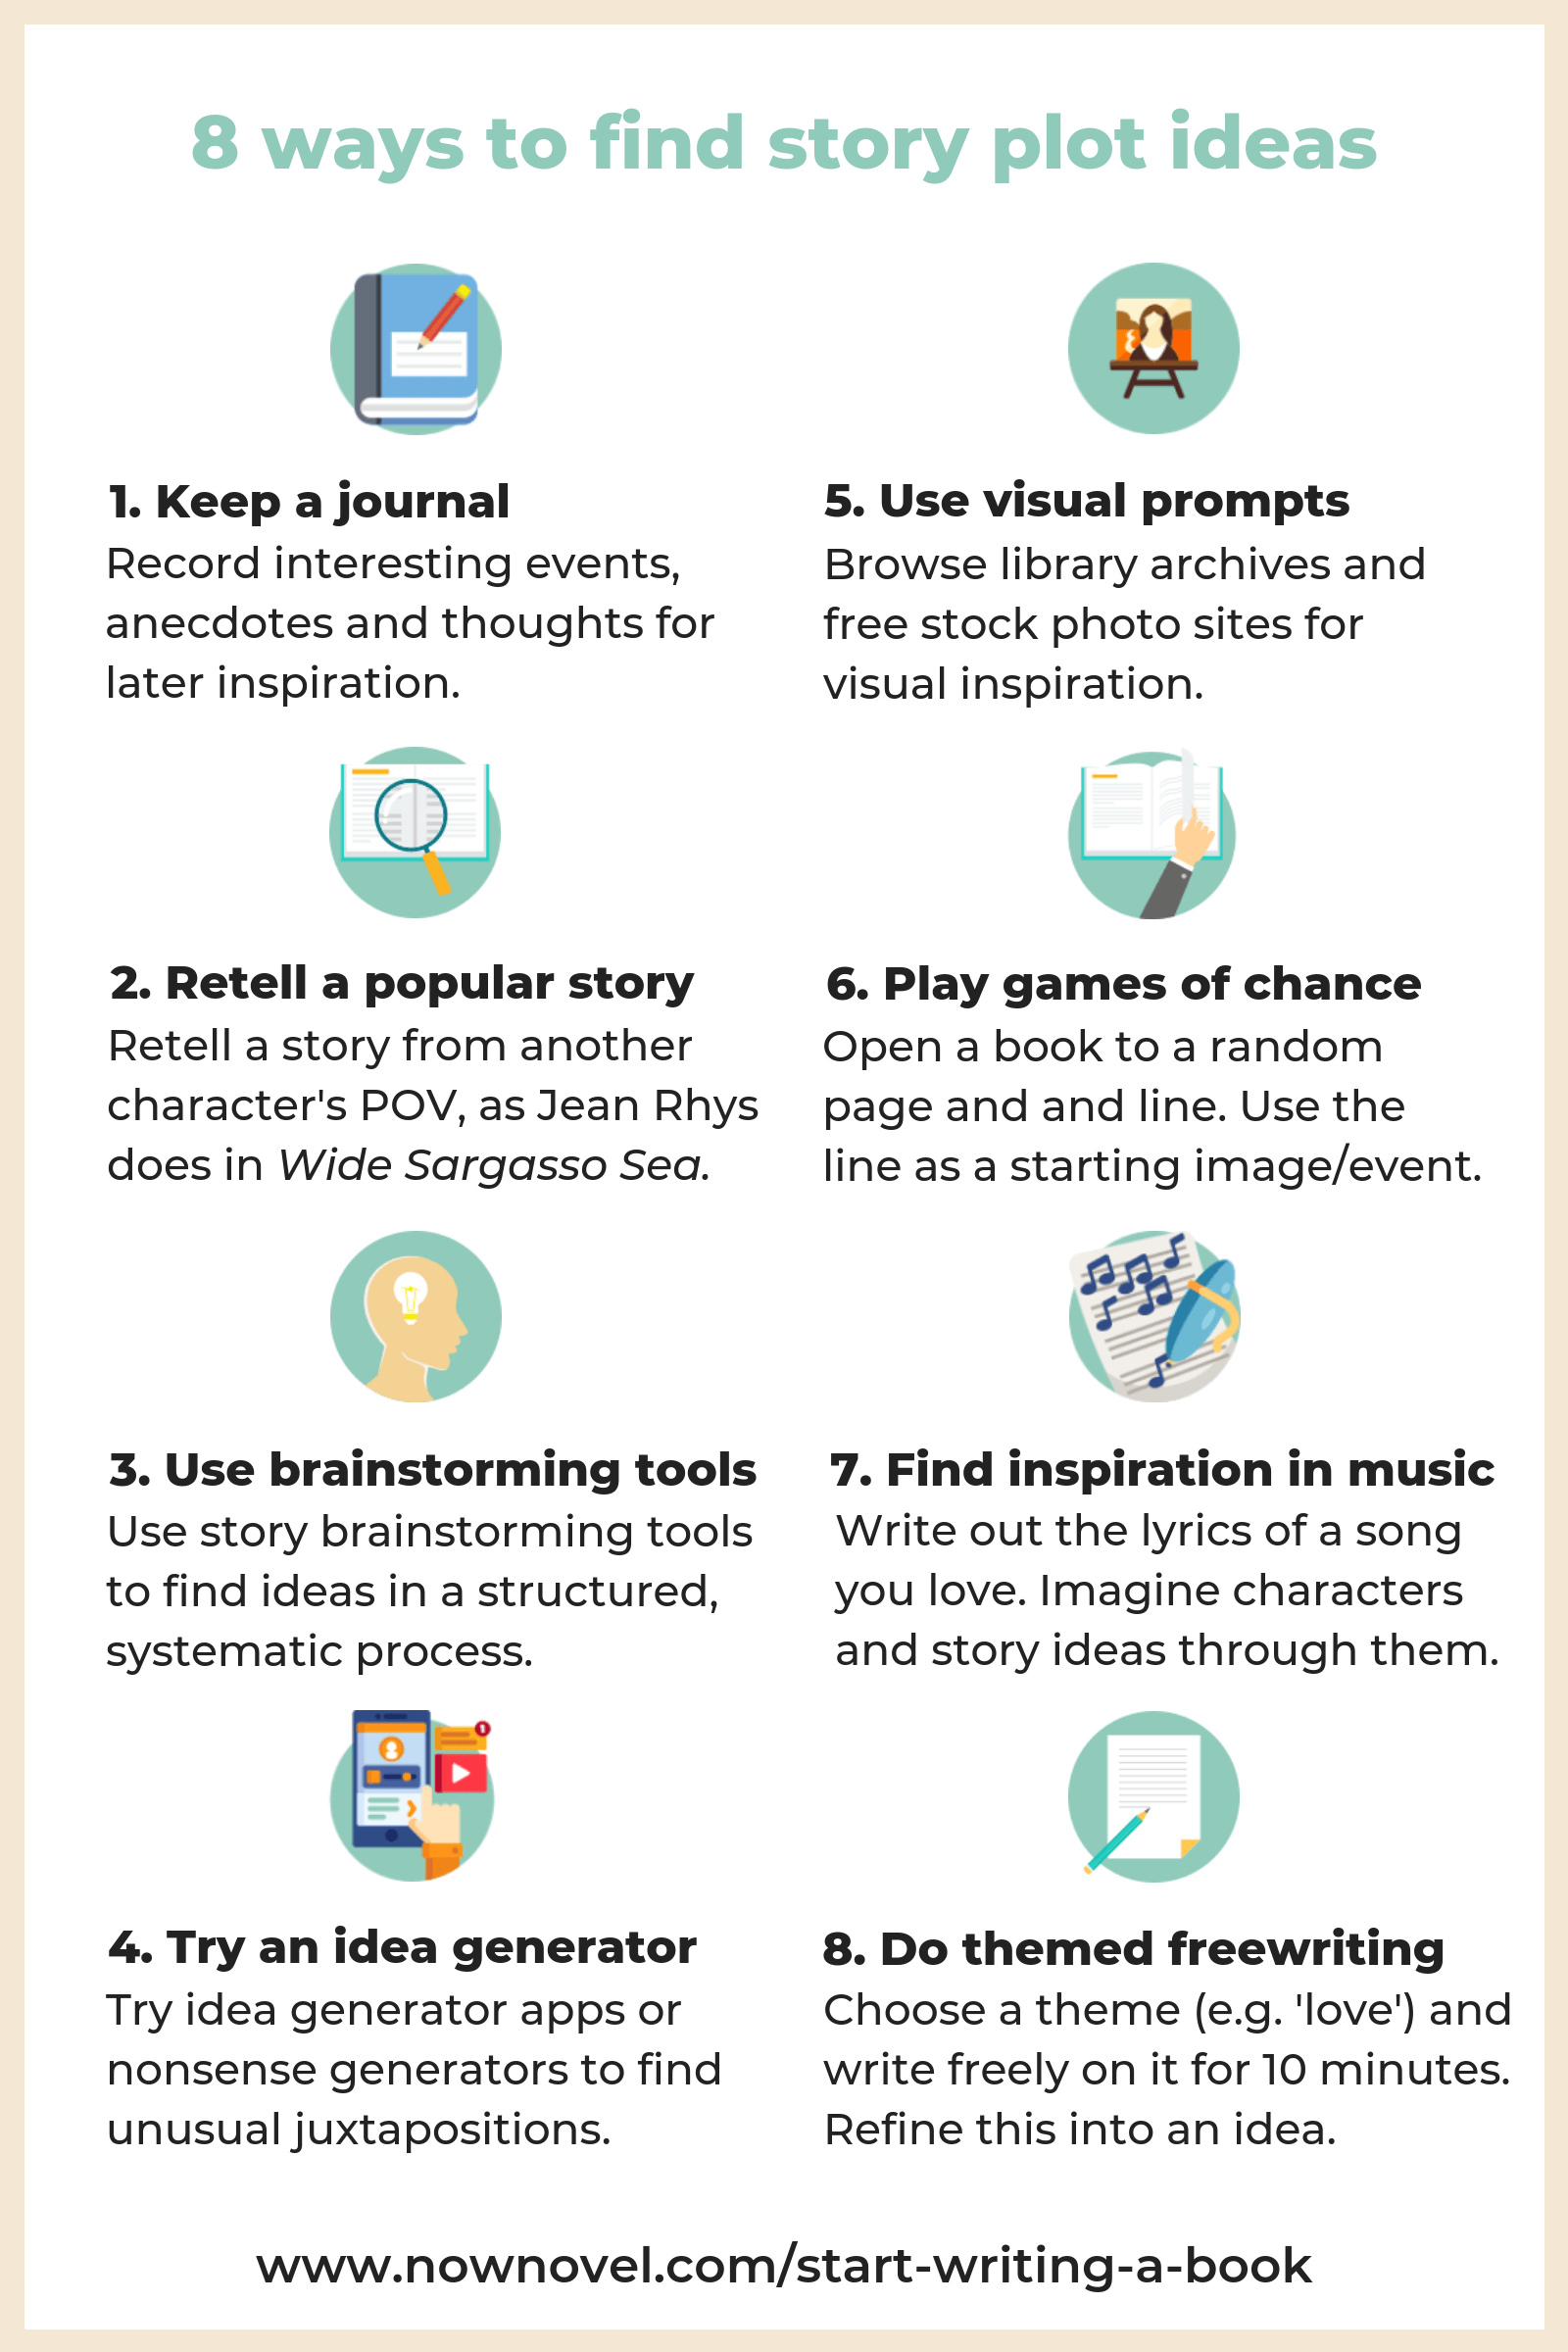 8 ways to find story plot ideas - infographic | Now Novel